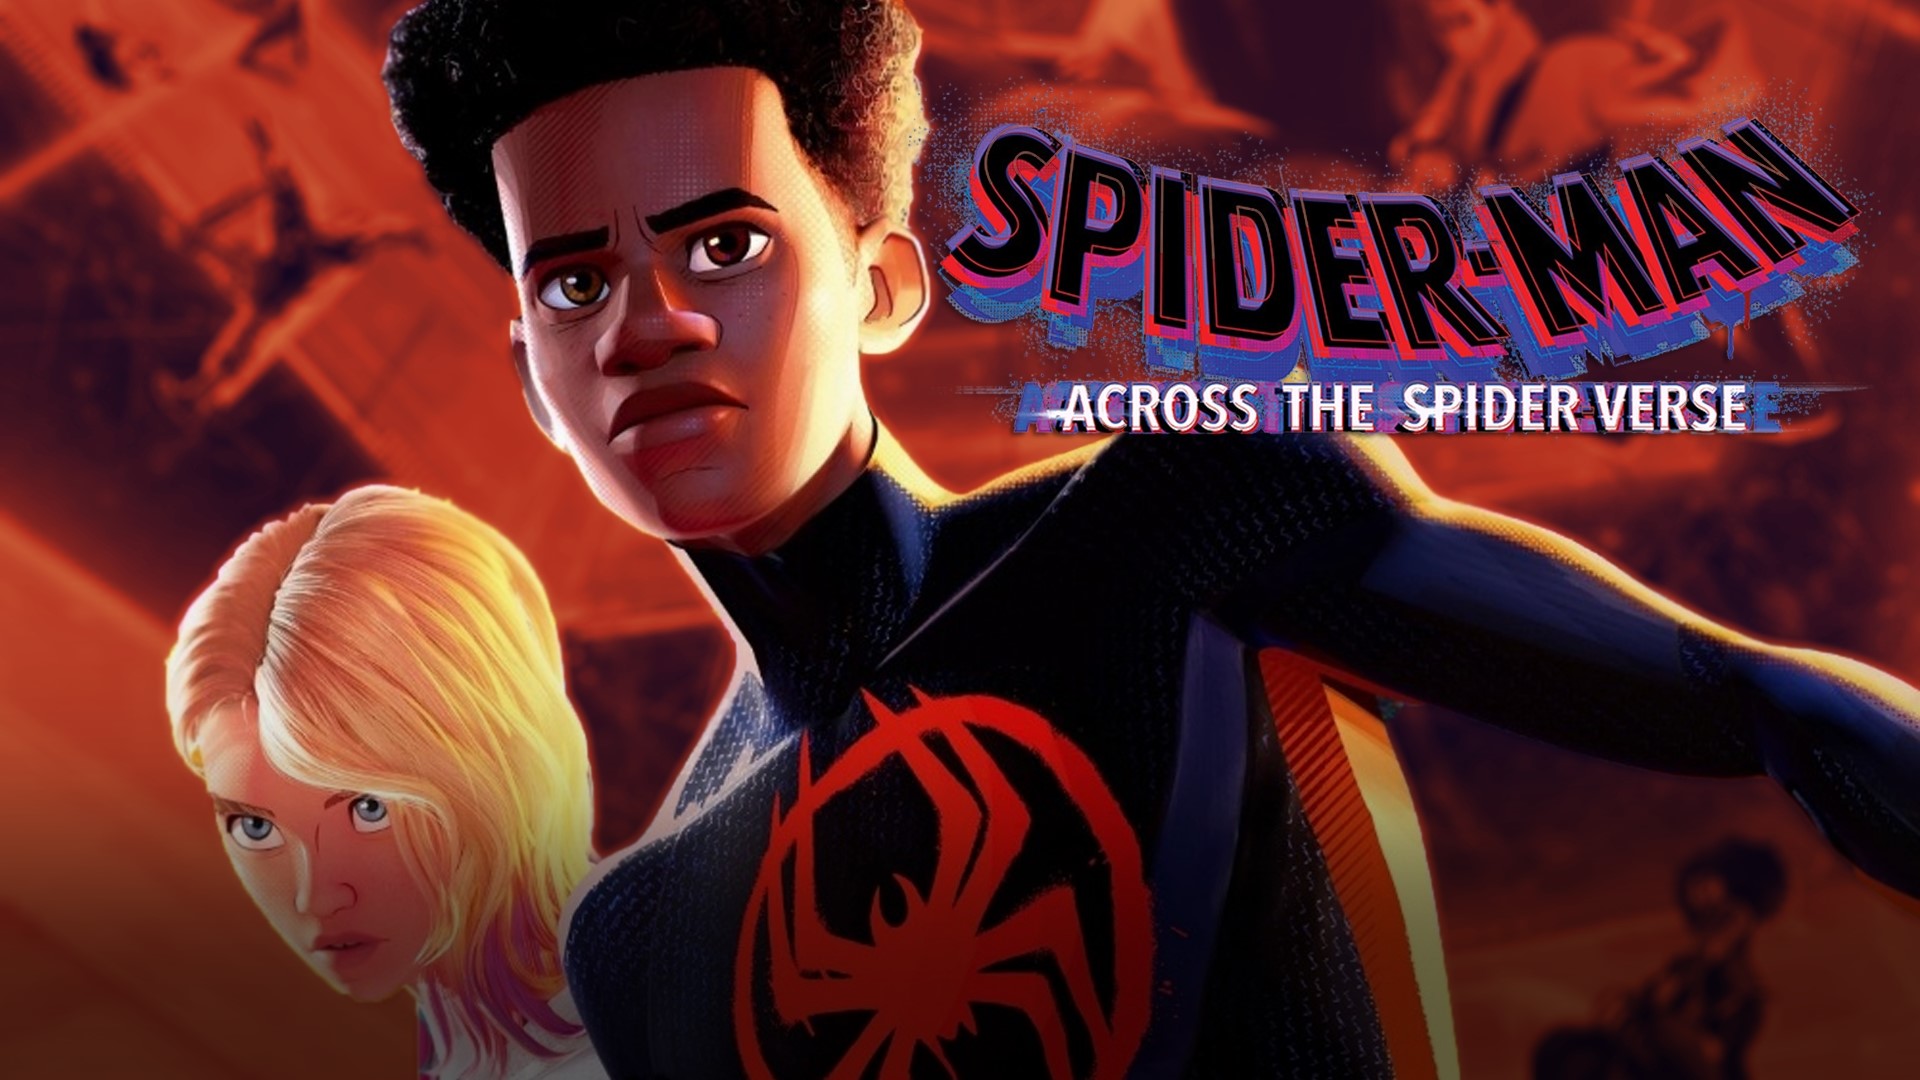 Miles Morales and Gwen Stacy are sucked into another multiverse mix-up and meet a whole bunch of other Spider-people in what may be the greatest sequel of all time.